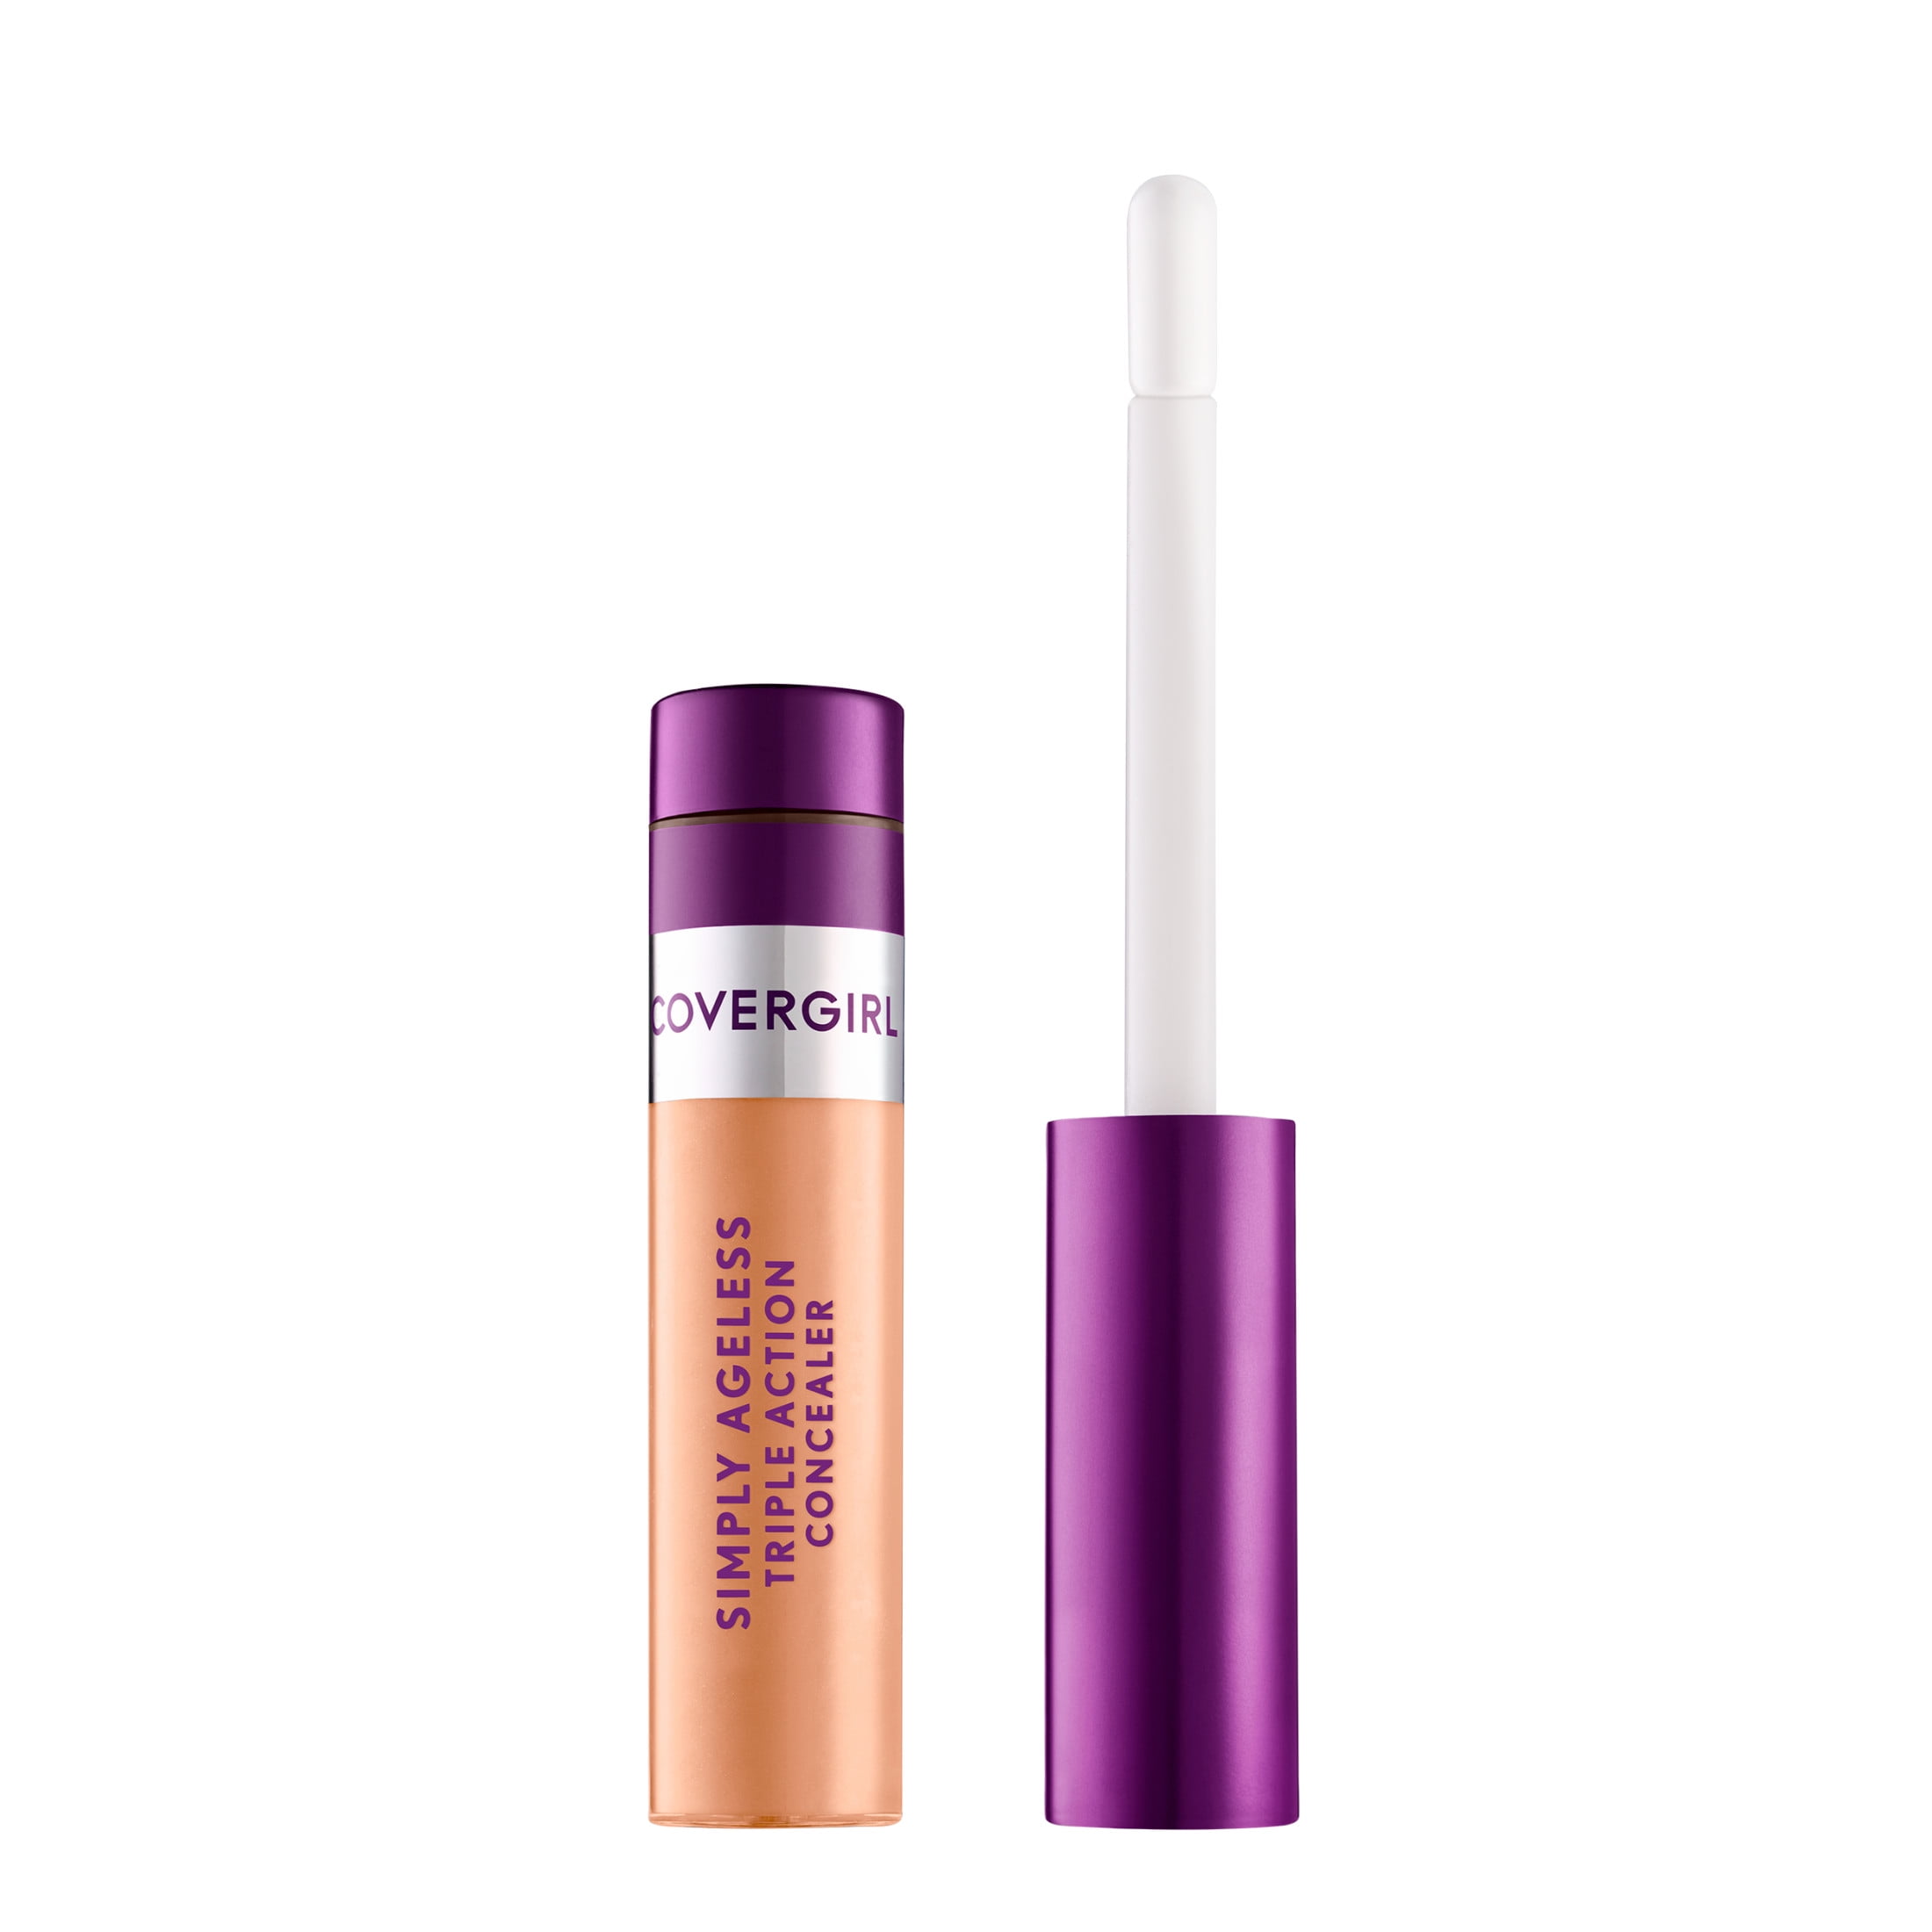 oz 350 Action Concealer, Warm 0.24 Beige, Ageless COVERGIRL Simply Triple fl